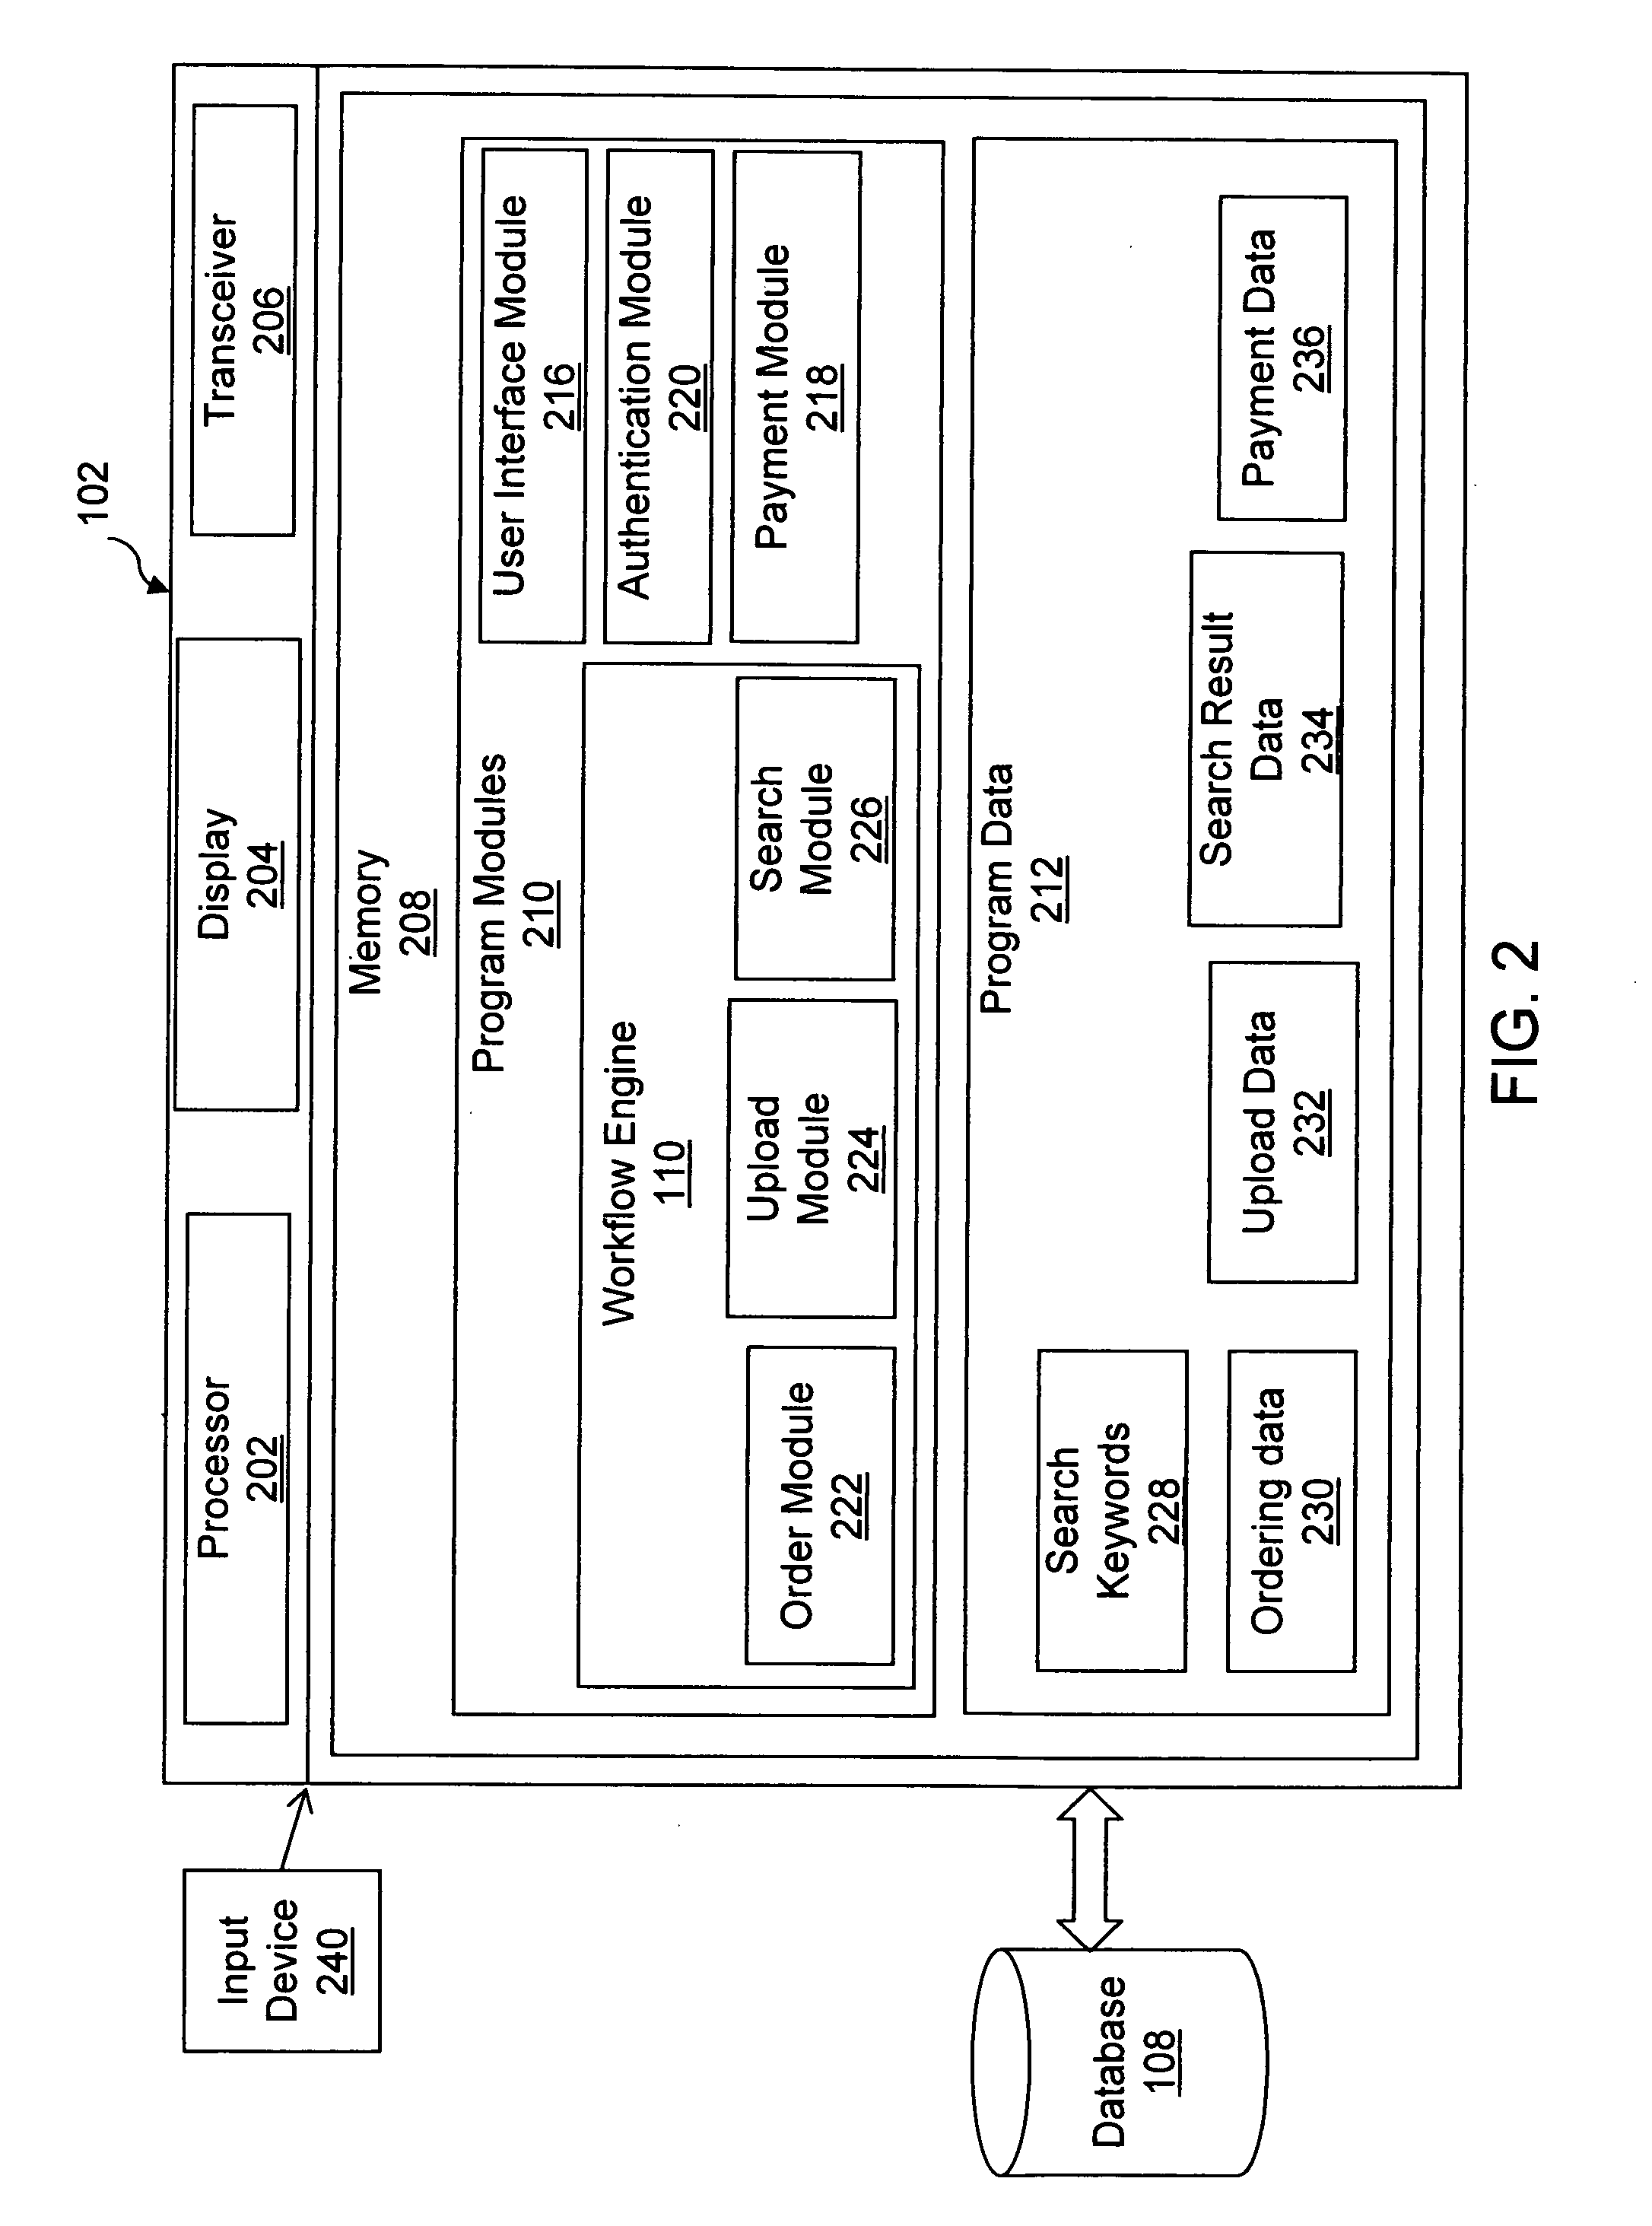 System and method for intellectual property prosecution management